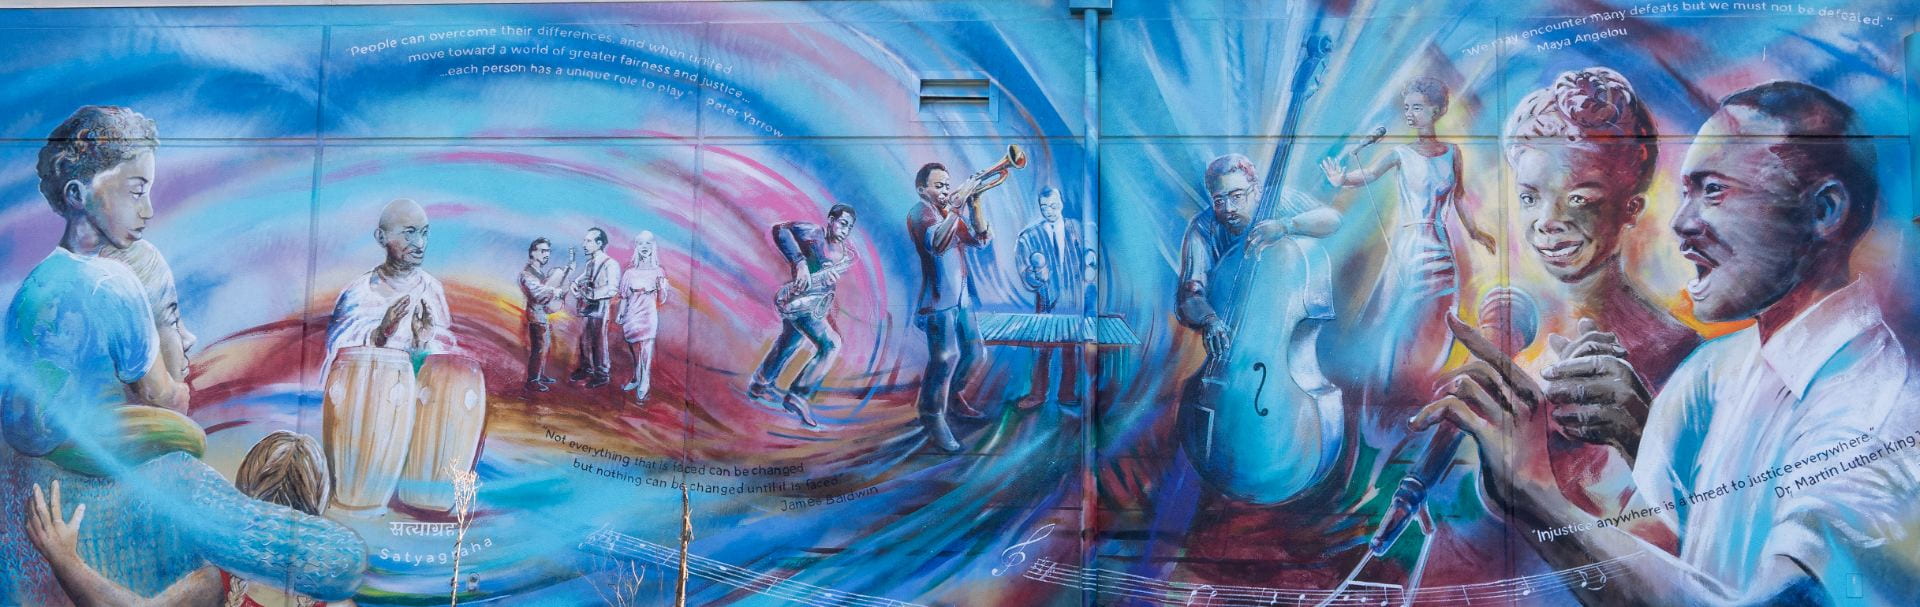 Painted mural that features Coleman in the middle playing jazz music with icons like Ella Fitzgerald and Dr. Martin Luther King, Jr surrounding him.